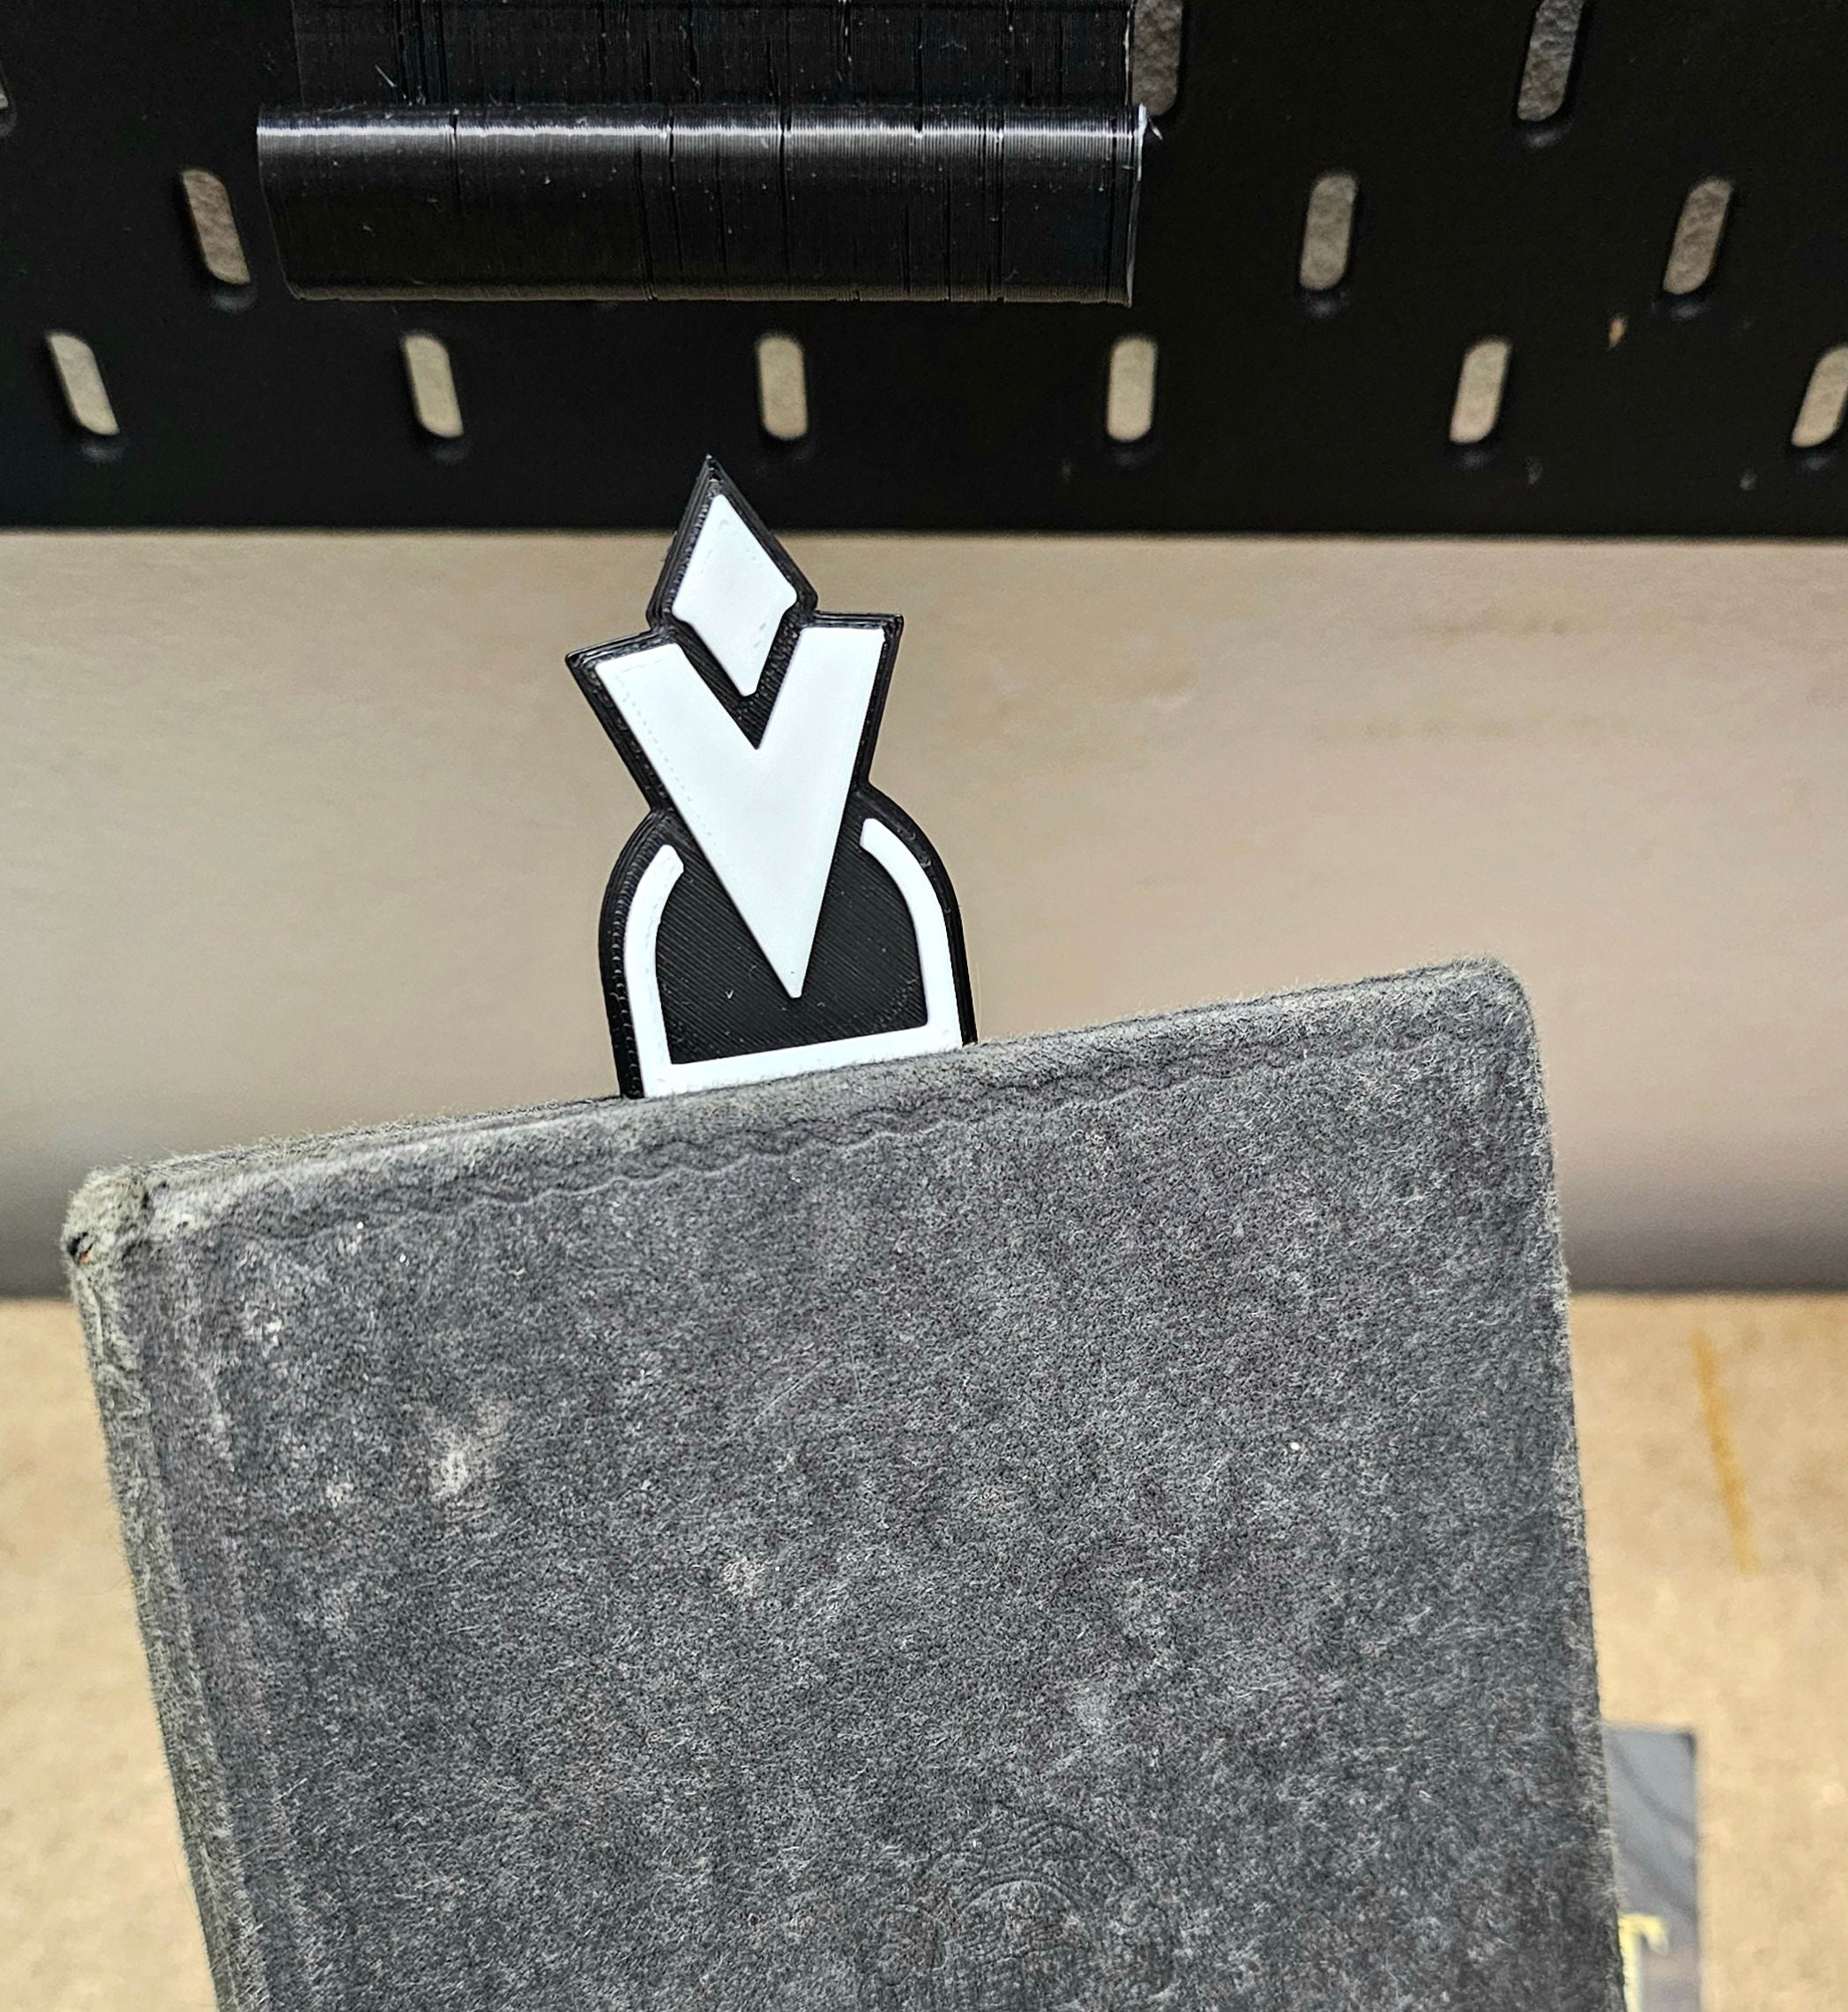 Skyrim Inspired no Lollygagging 3d Printed Sign 